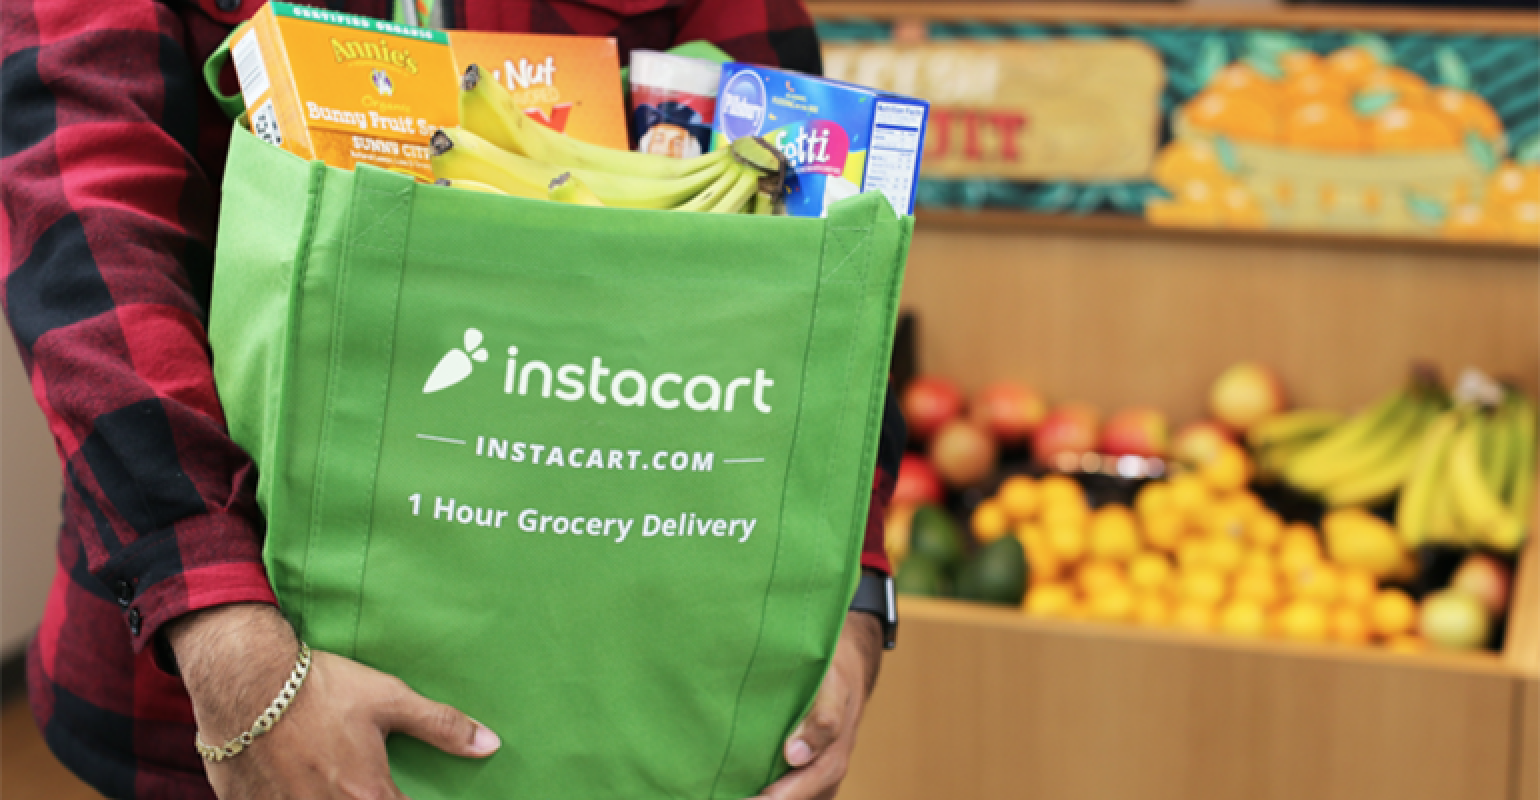 A man holding a green Instacart grocery bag with fruits beside it